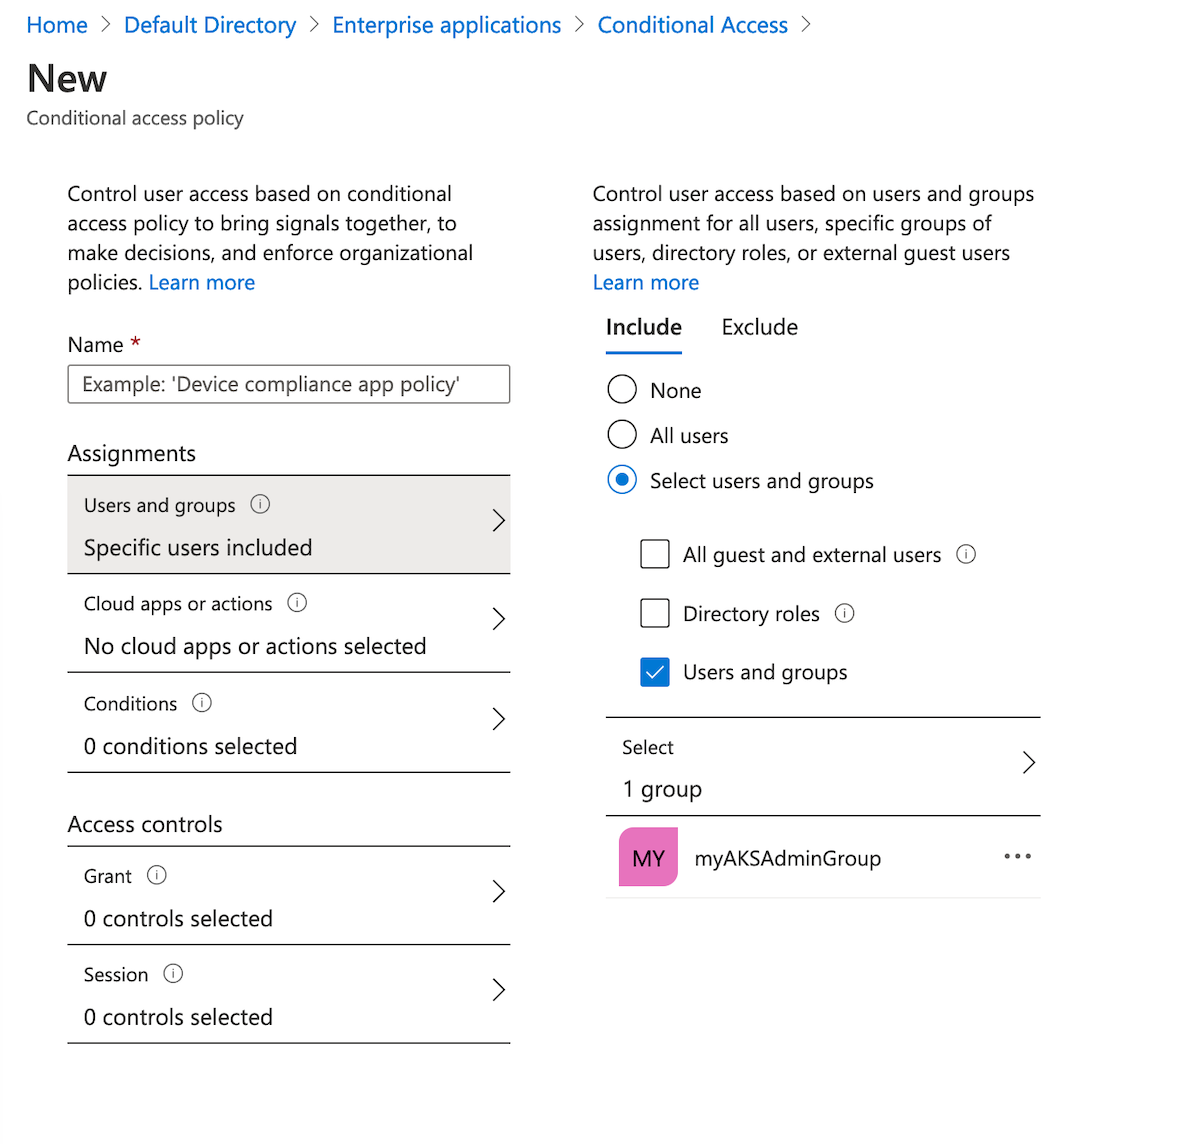 Selecting users or groups to apply the Conditional Access policy